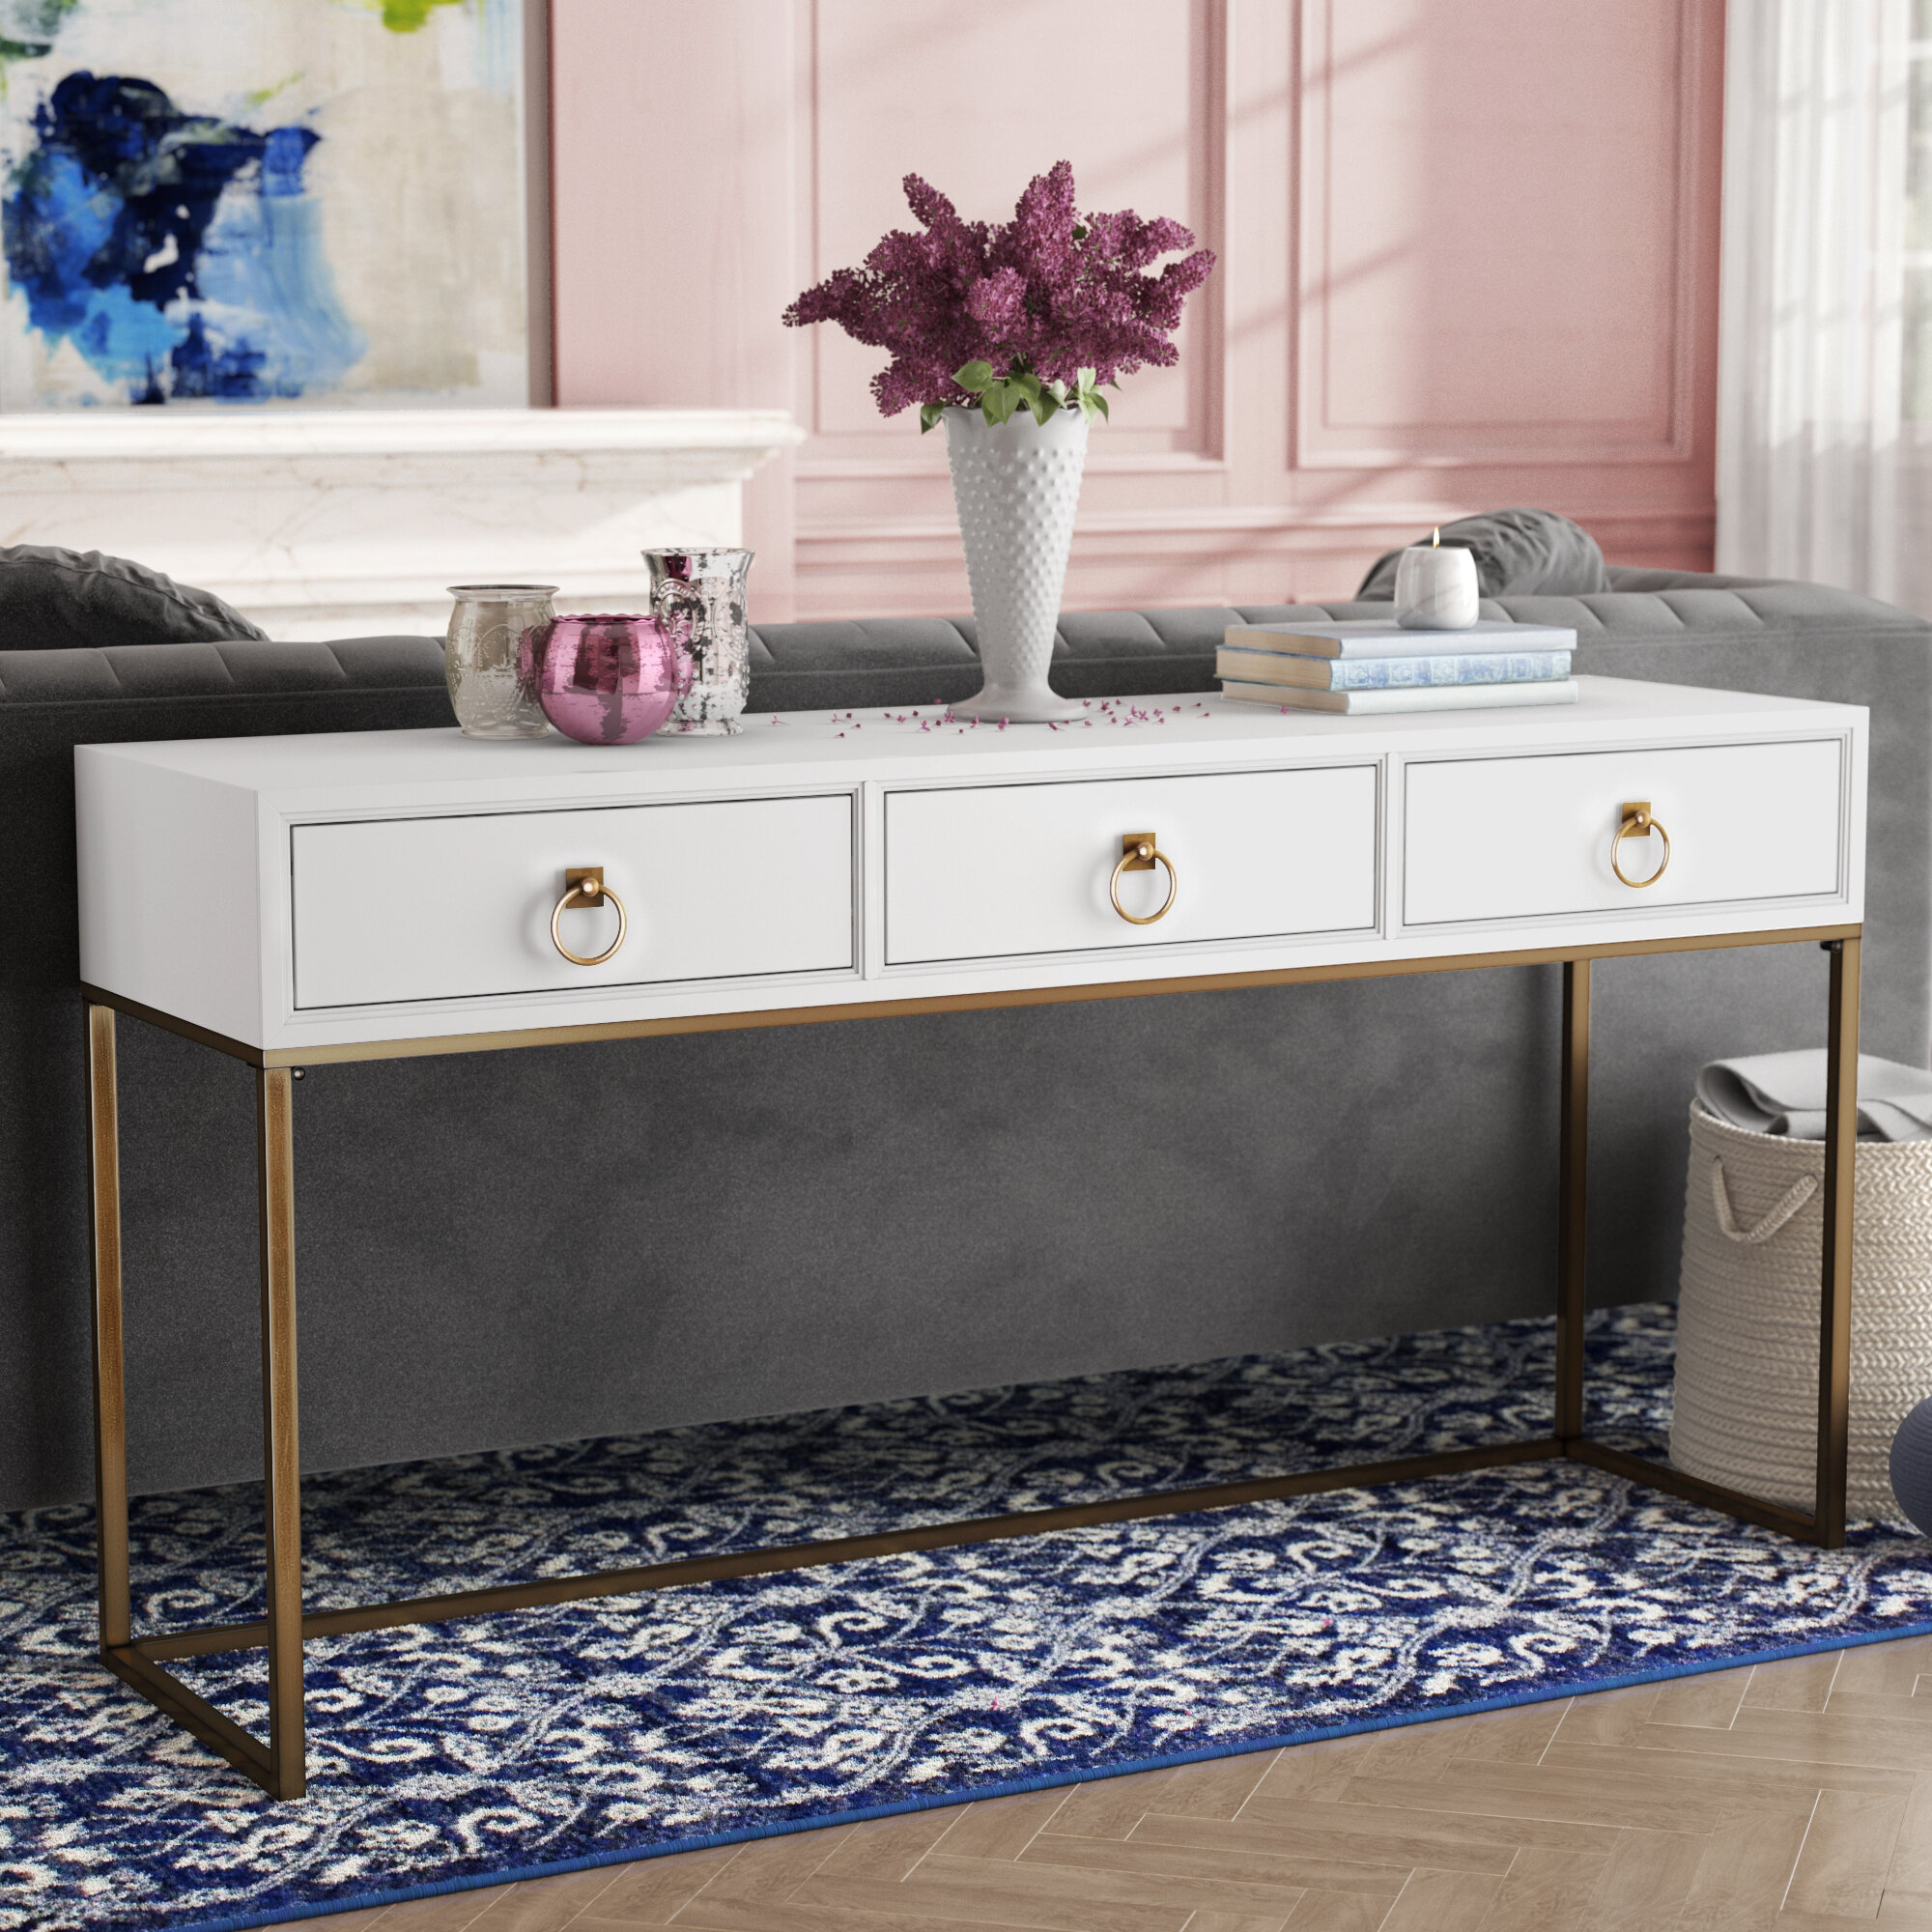 Extra Long Console Table Youll Love In 2021 Visualhunt